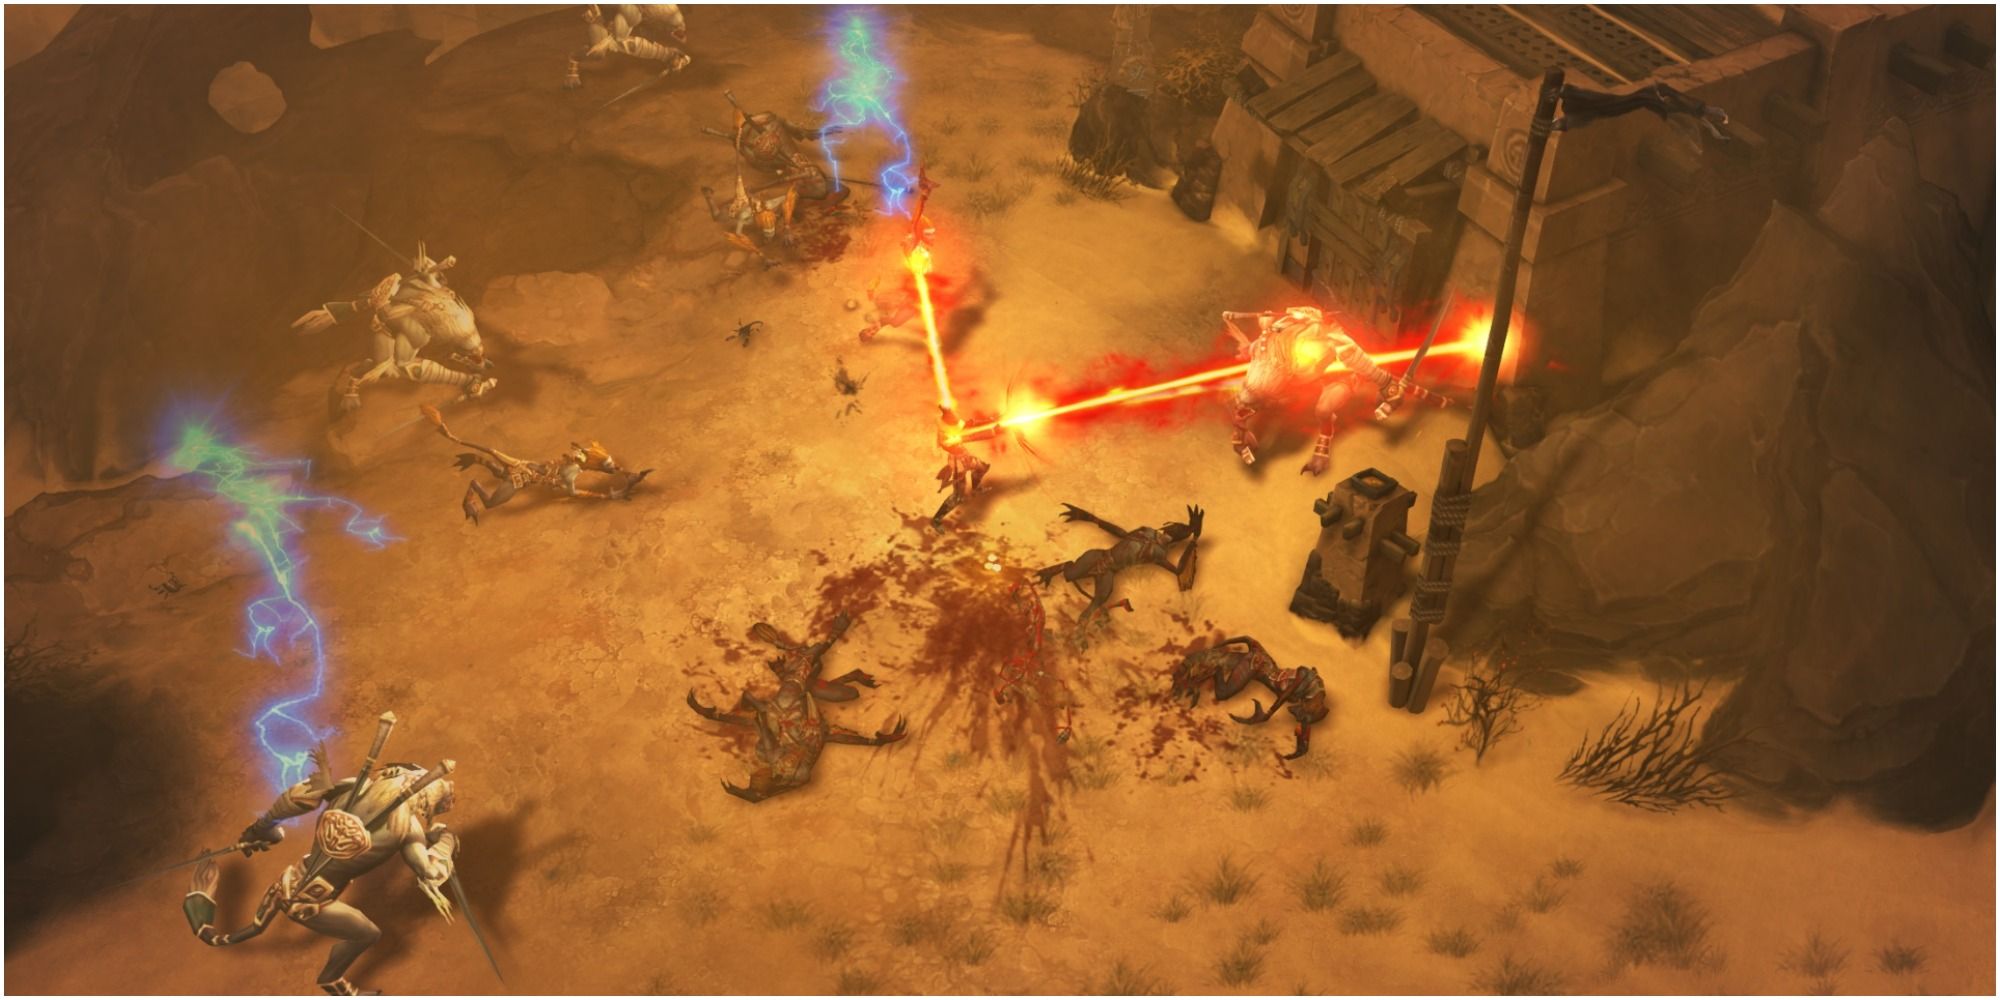 Diablo 3 Wizards Channeled Chaos Bolt Collapses